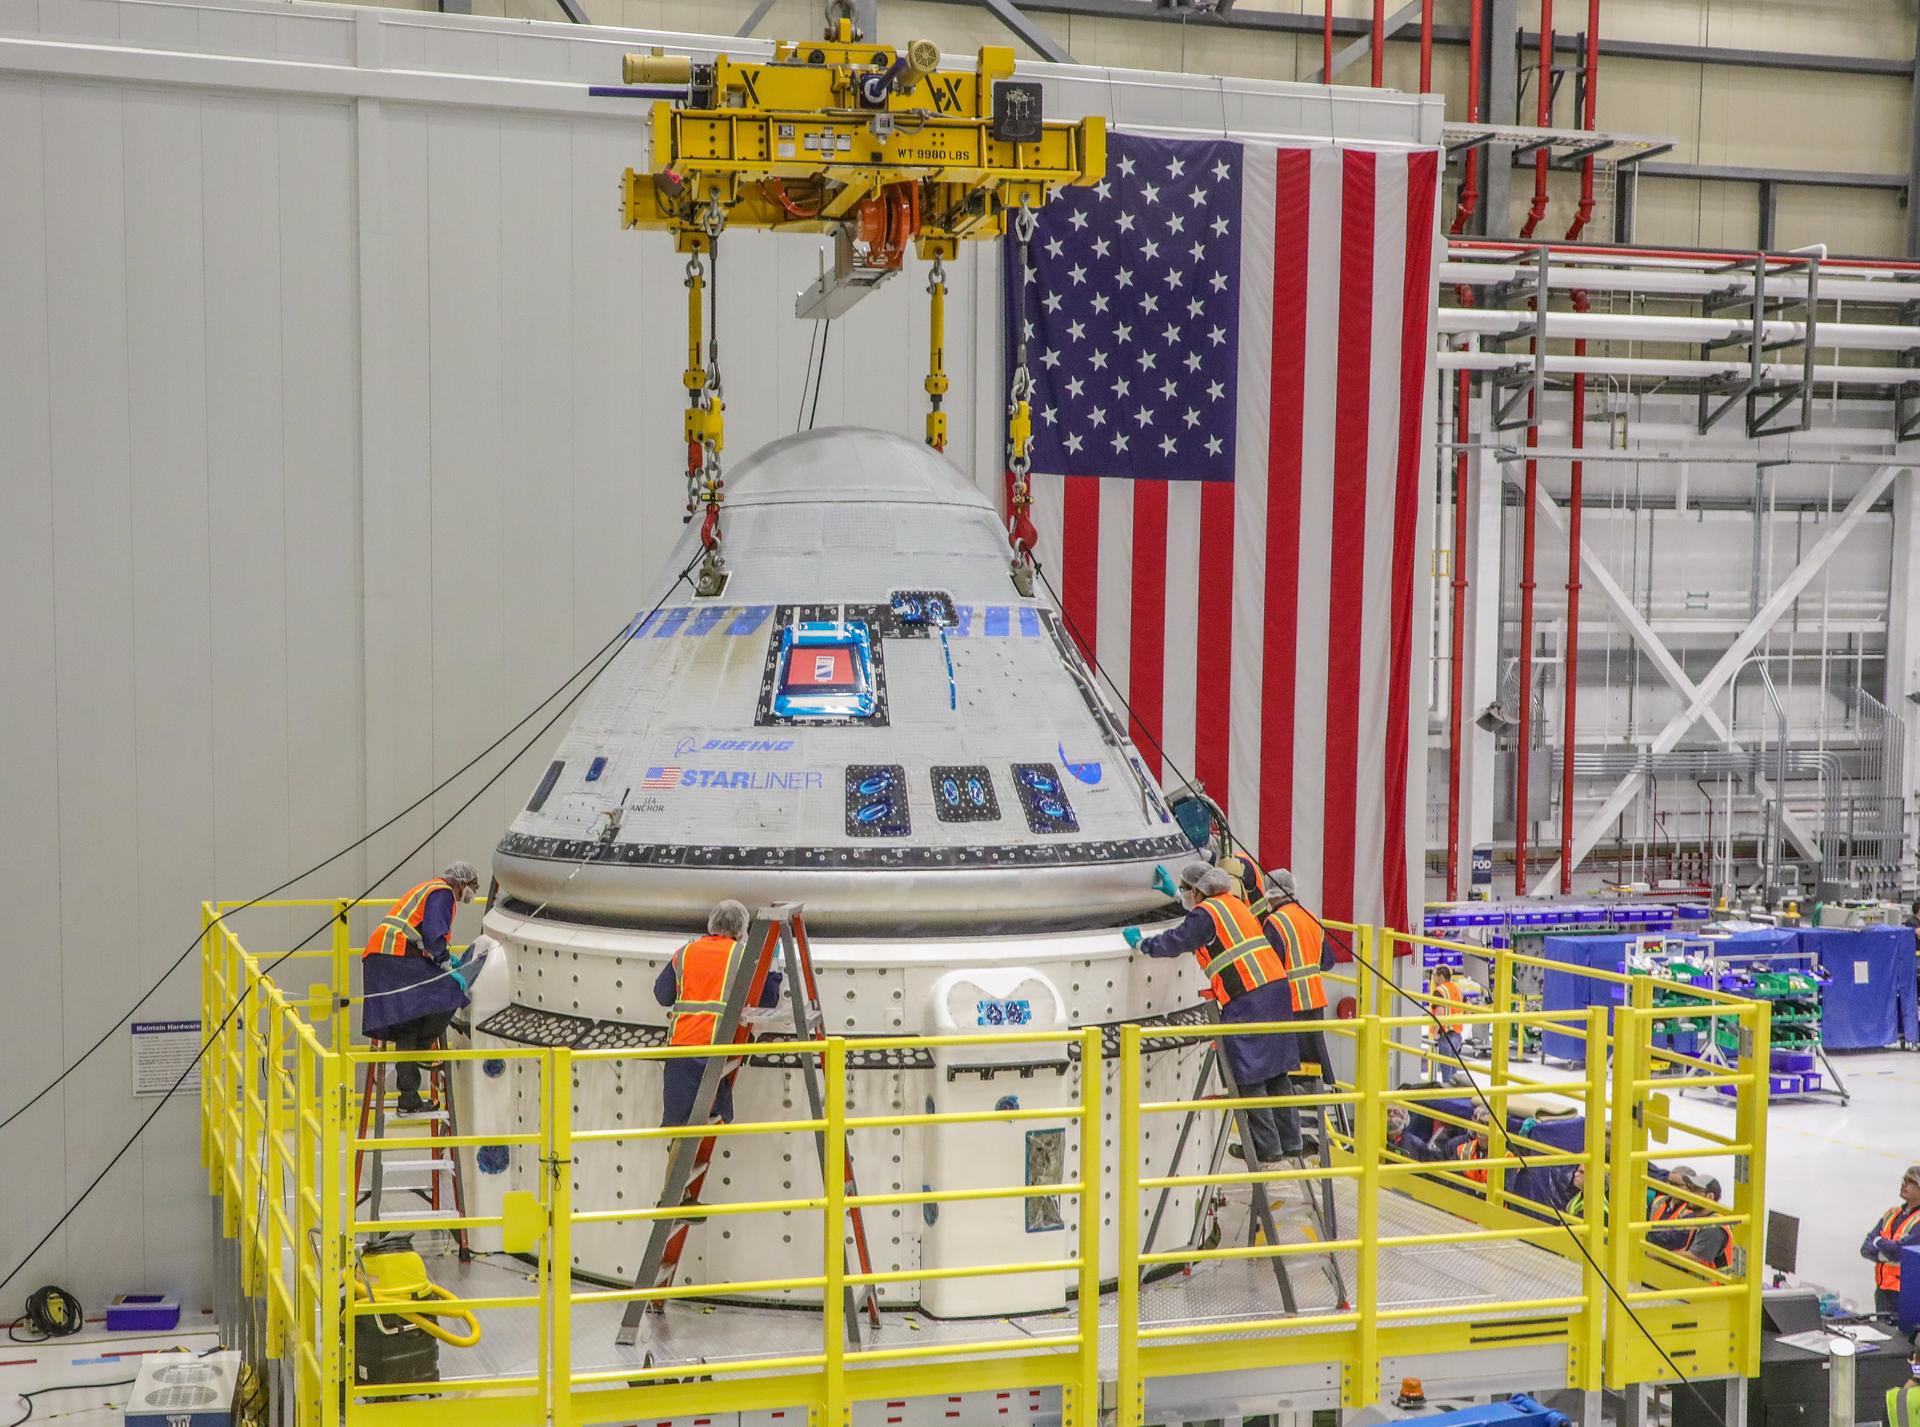 Technicians work around Boeing's Starliner spacecraft supported by a yellow crane during processing.